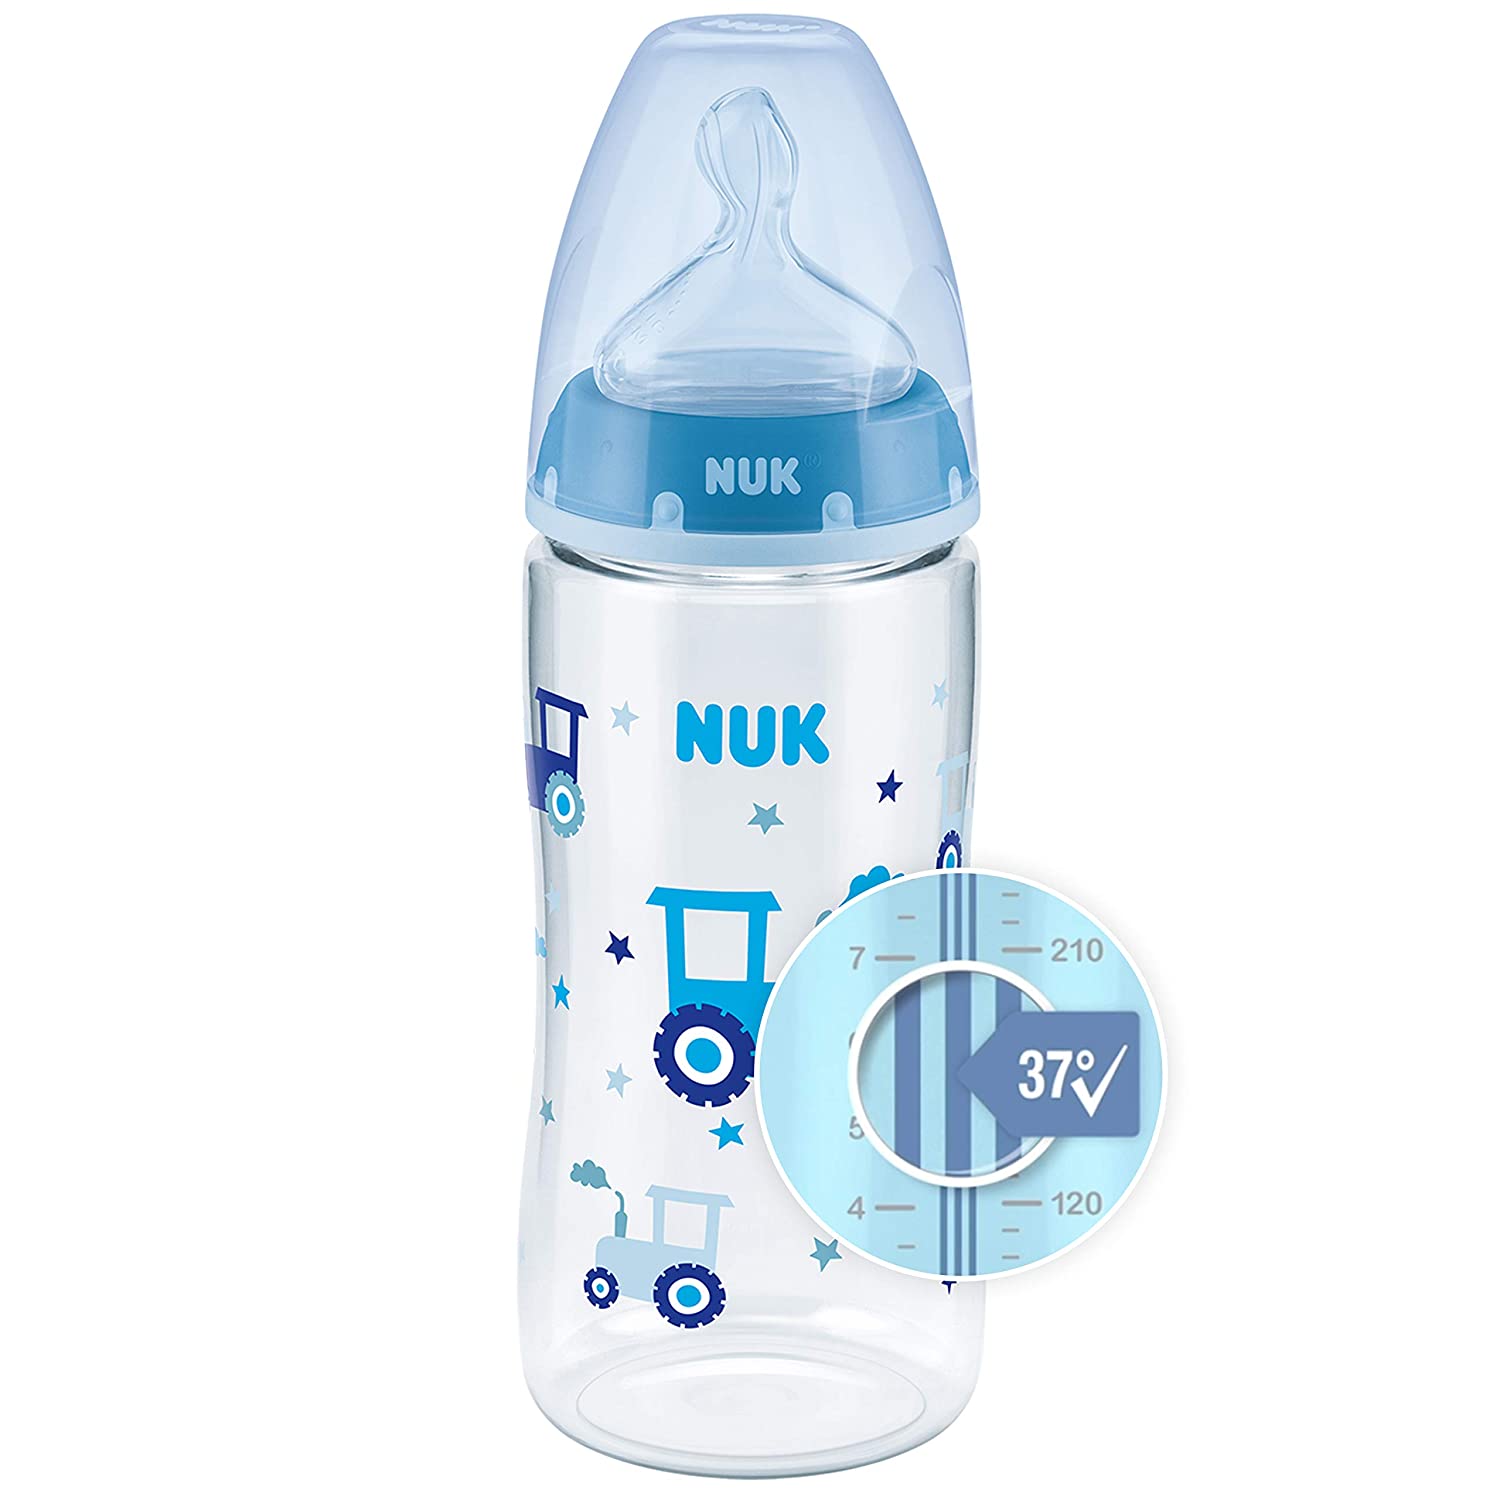 NUK First Choice+ Baby Bottle with Temperature Control Display blue